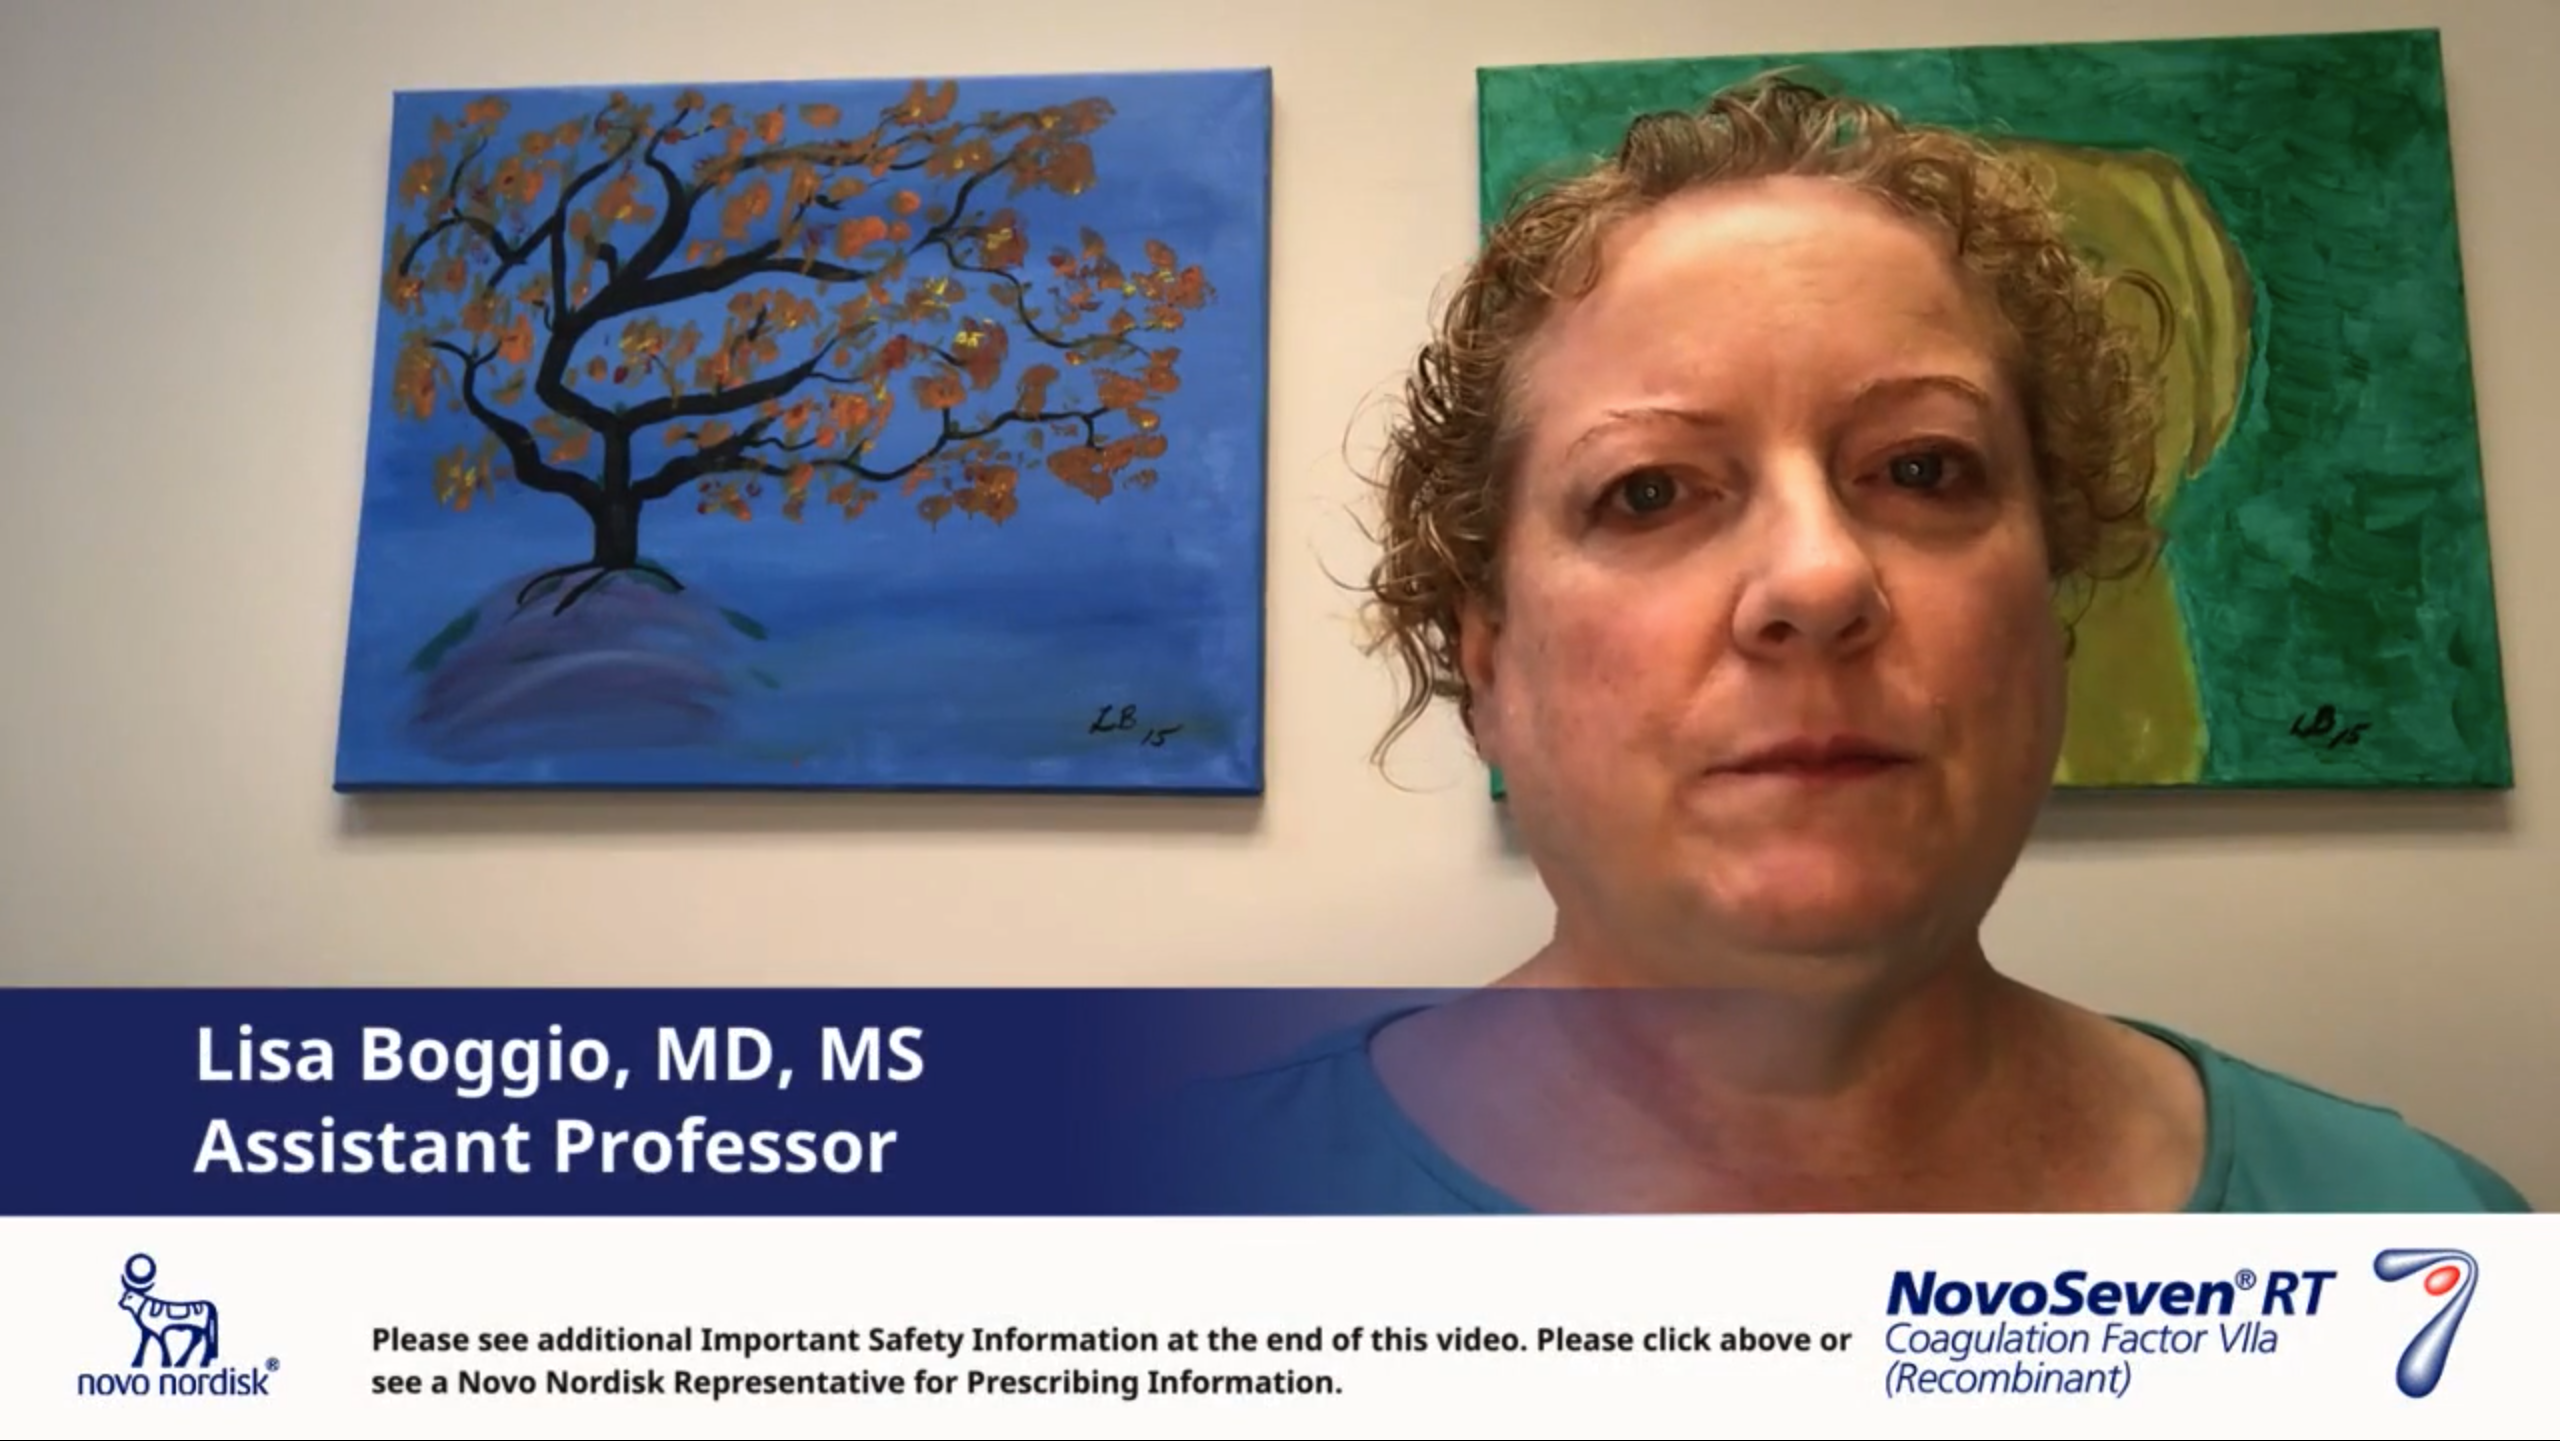 NovoSeven® RT for Effective Bleed Control: A Patient Shows Signs of Newly Developed Inhibitors